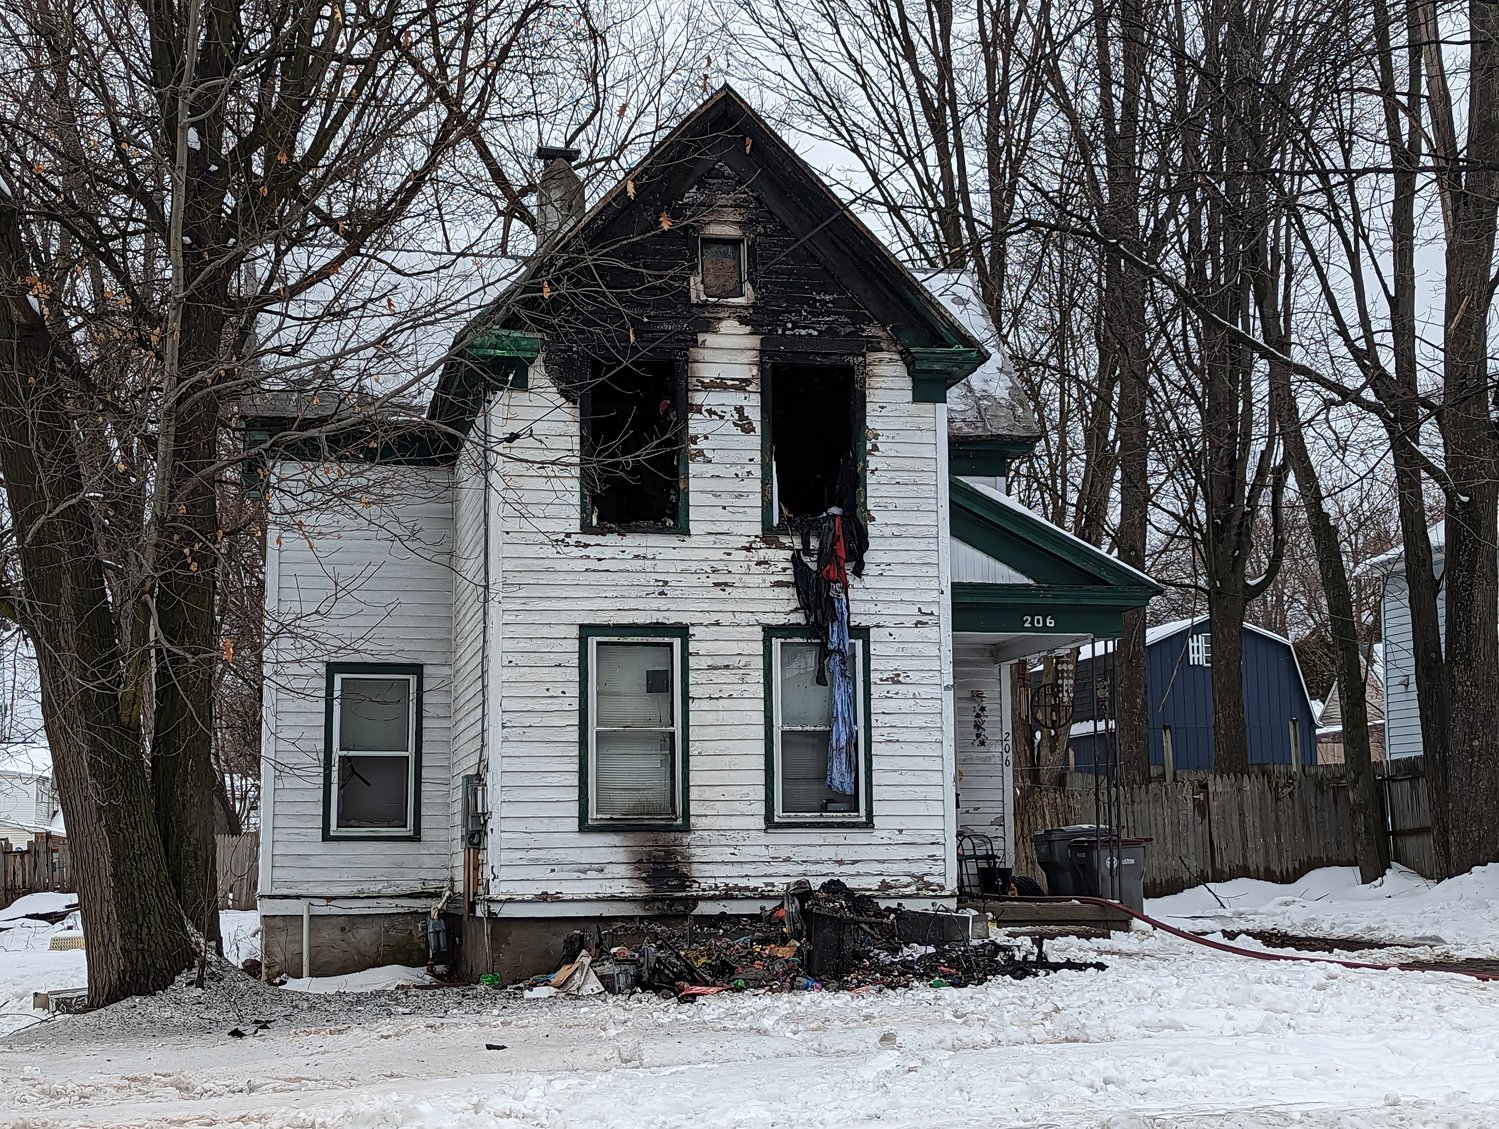 A family of five has been displaced after this house fire at 206 S. Doxtator Ave. in Rome Saturday morning. Two people were injured, including a firefighter, officials said.